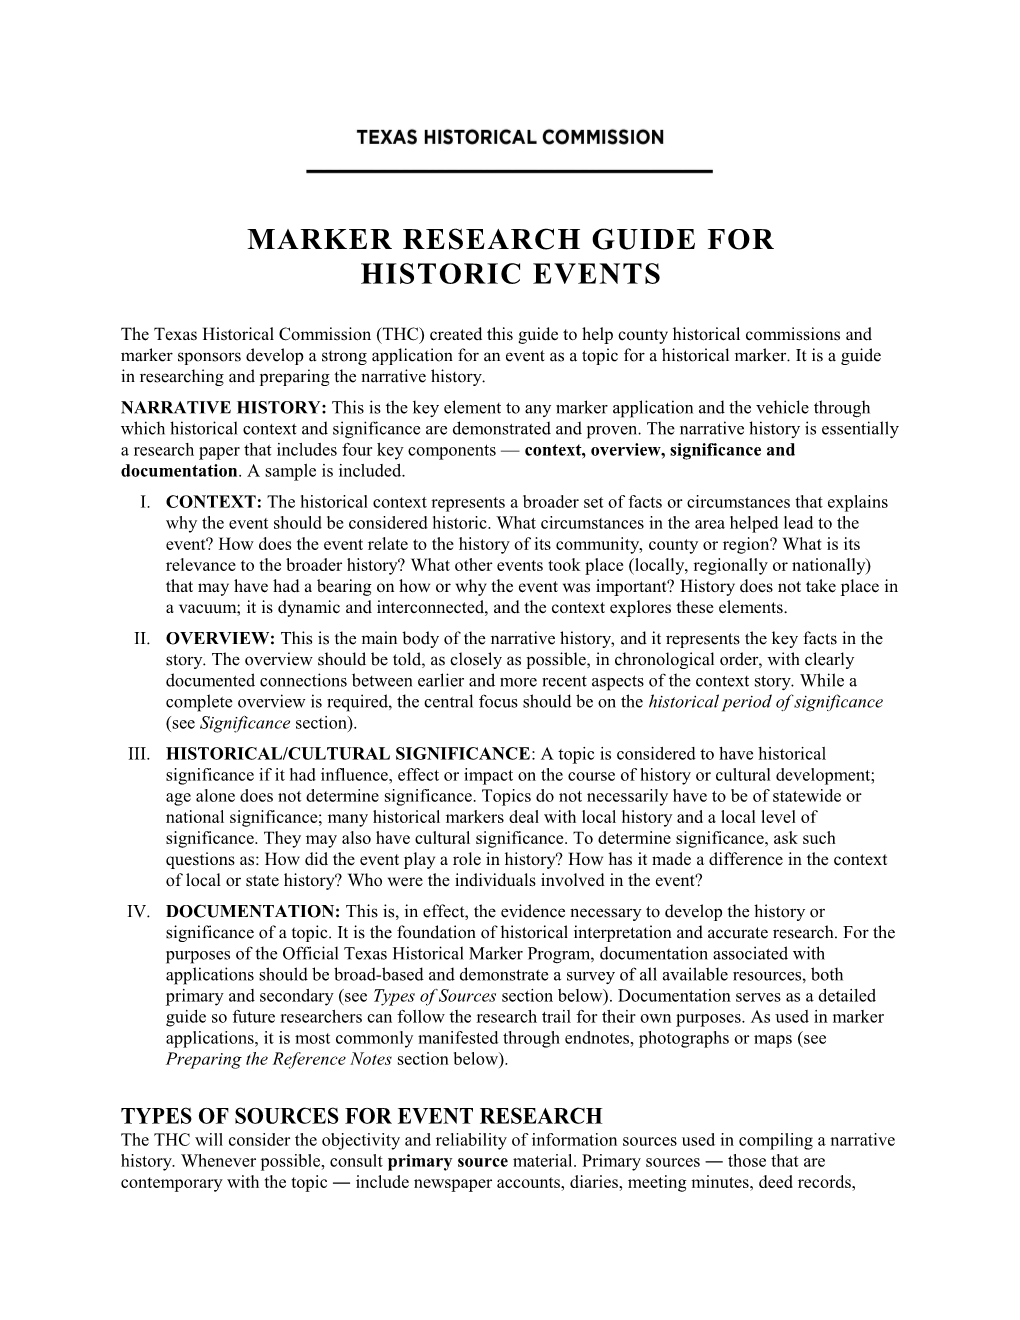 Marker Research Guide For